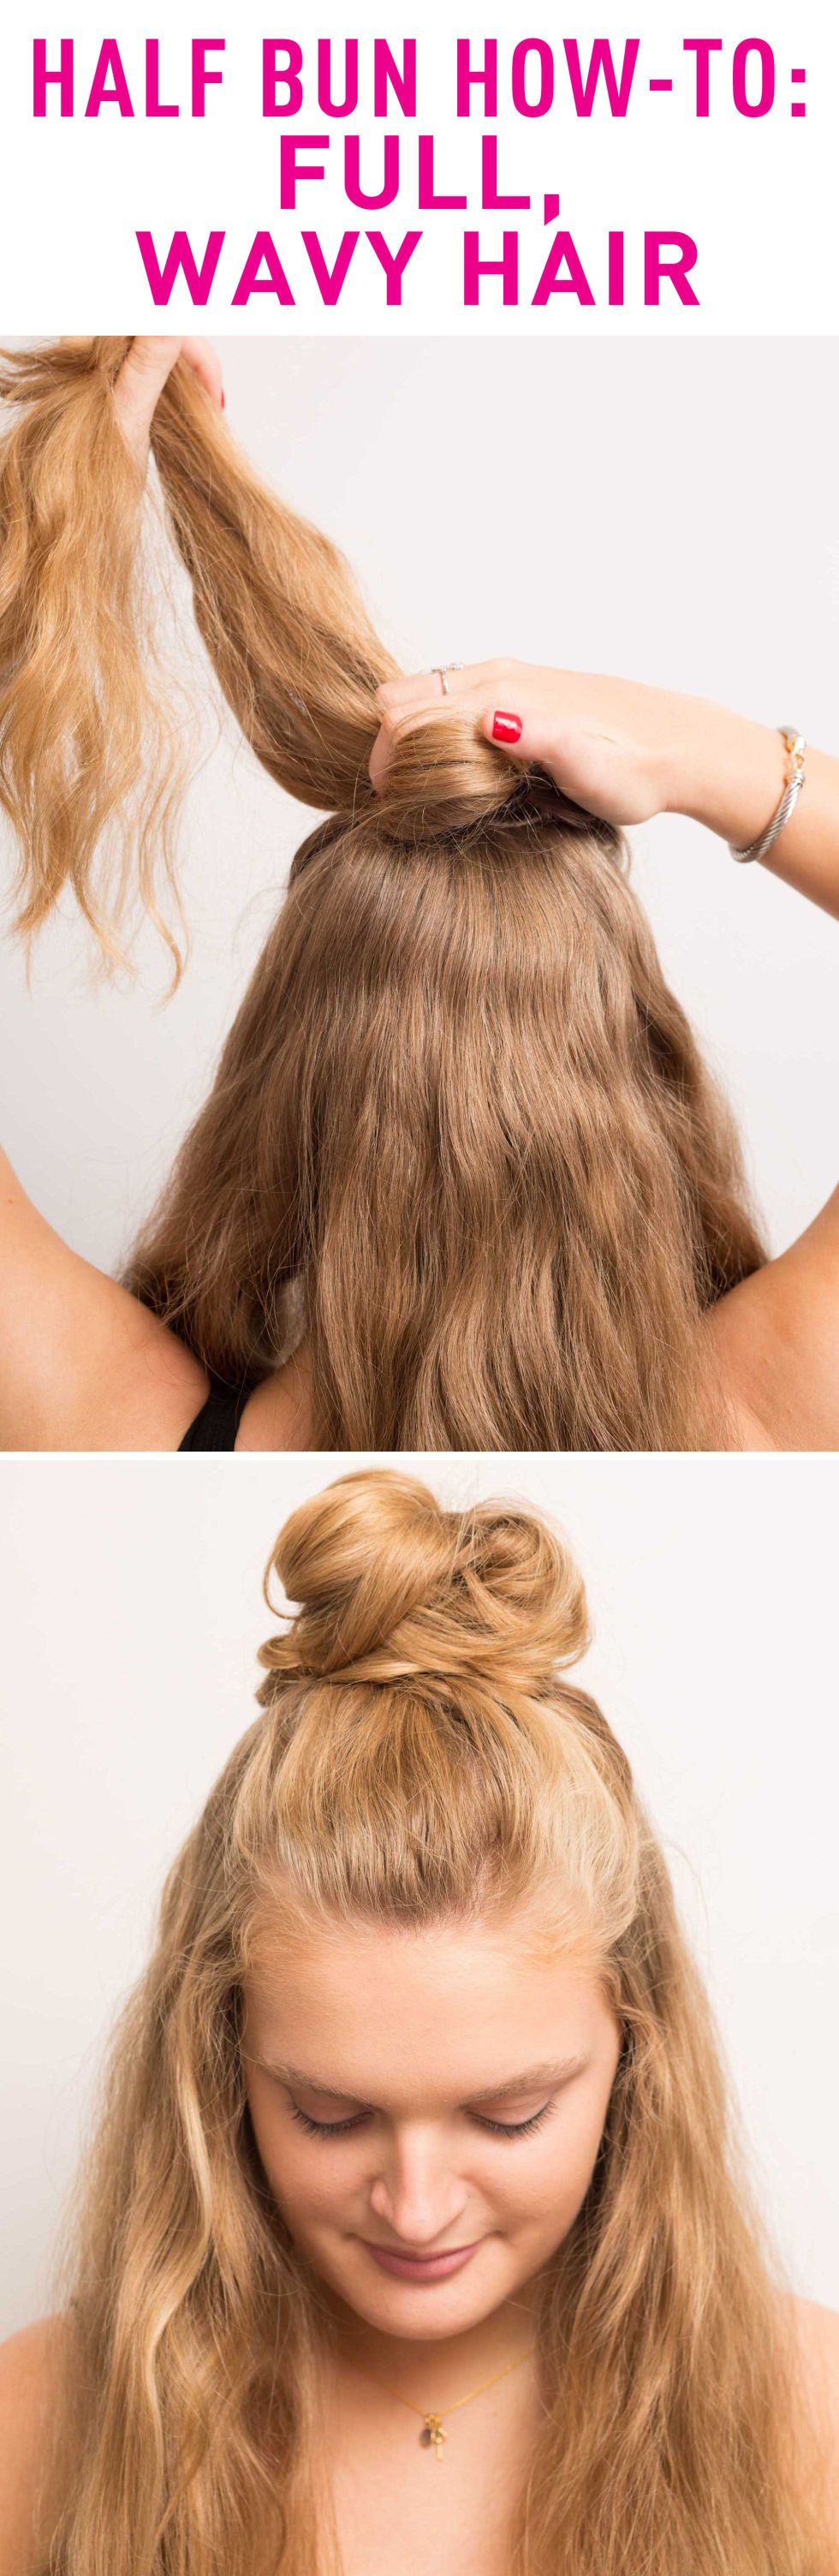 11 Easy Thick Hair Styling Hacks